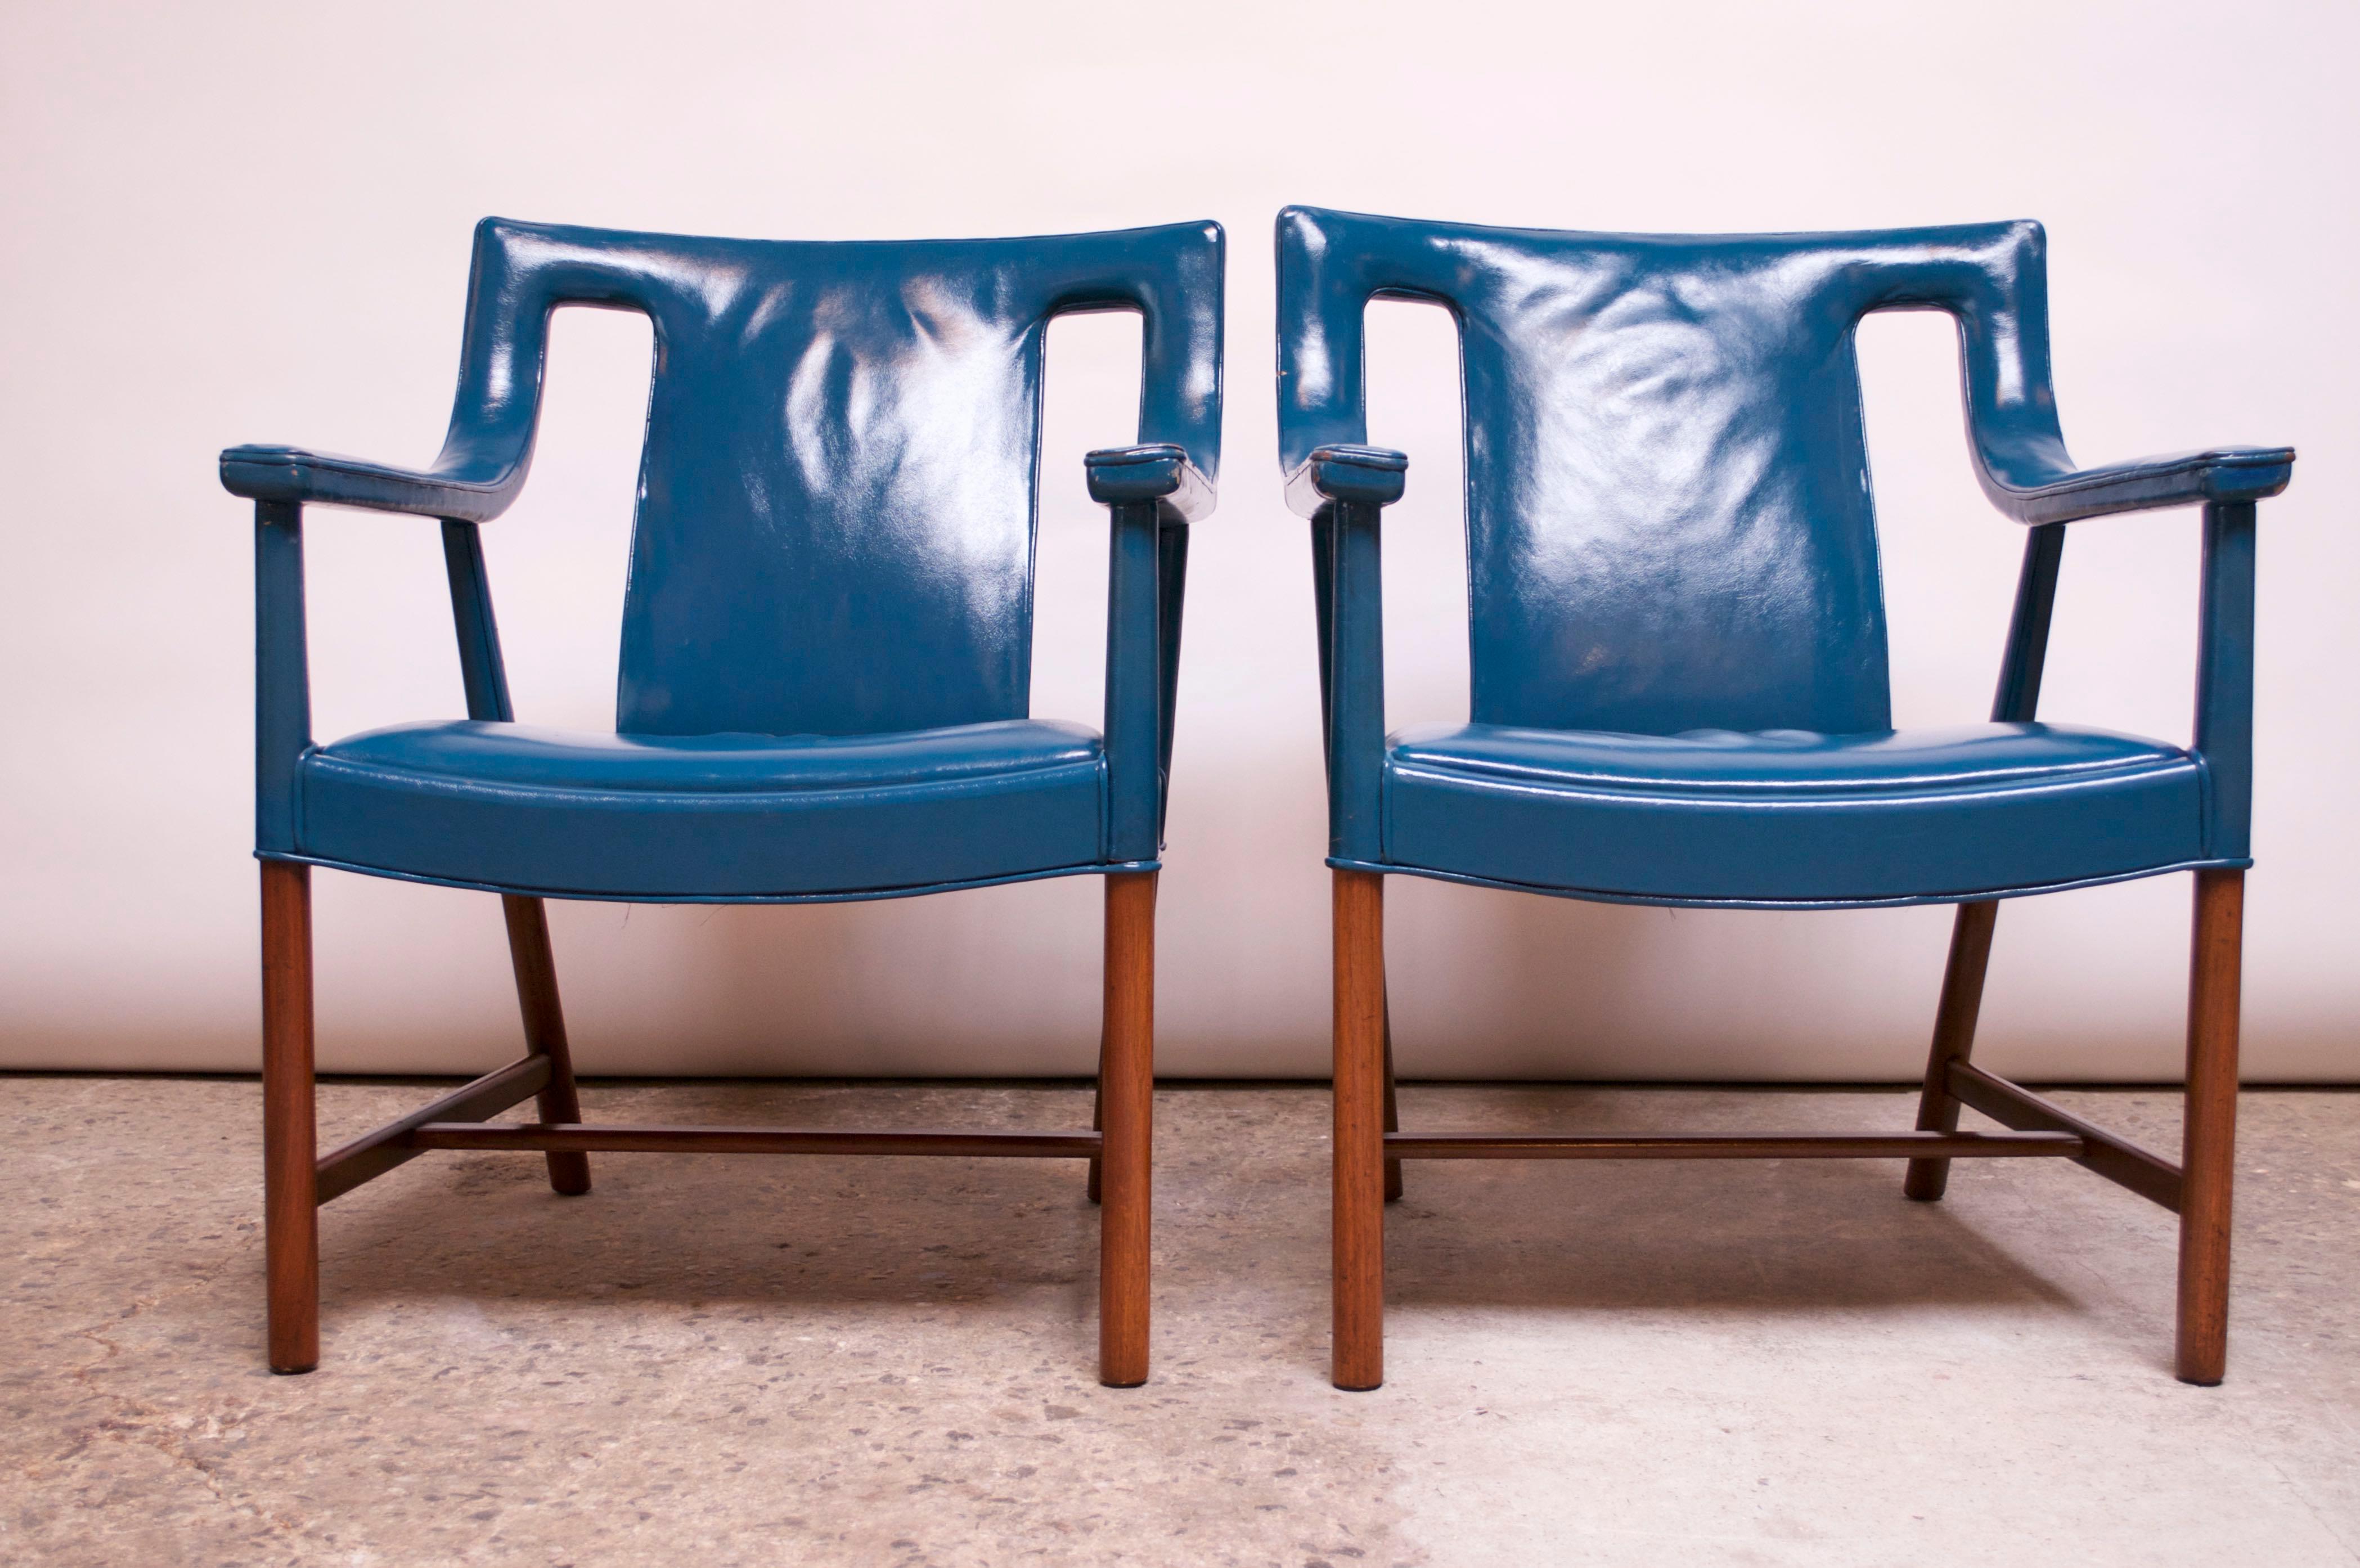 Mid-20th Century Pair of Danish Blue Leather Armchairs by Ejner Larsen and Aksel Bender Madsen